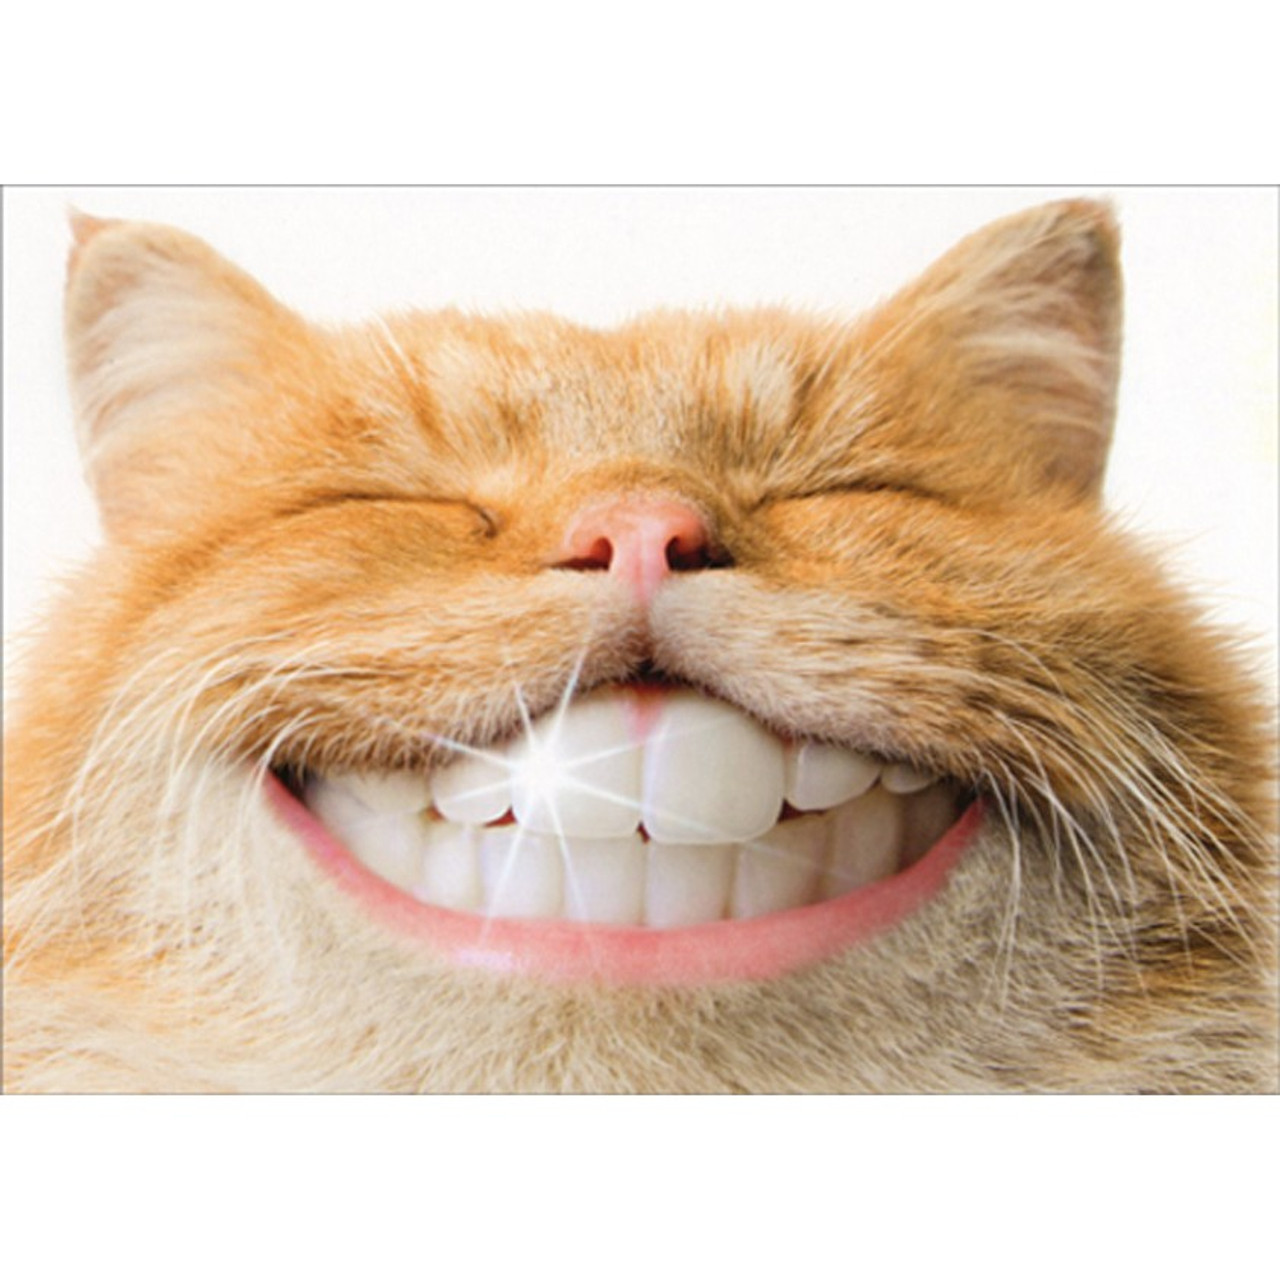 Cat With Shiny Human Teeth Humorous : Funny Support Card